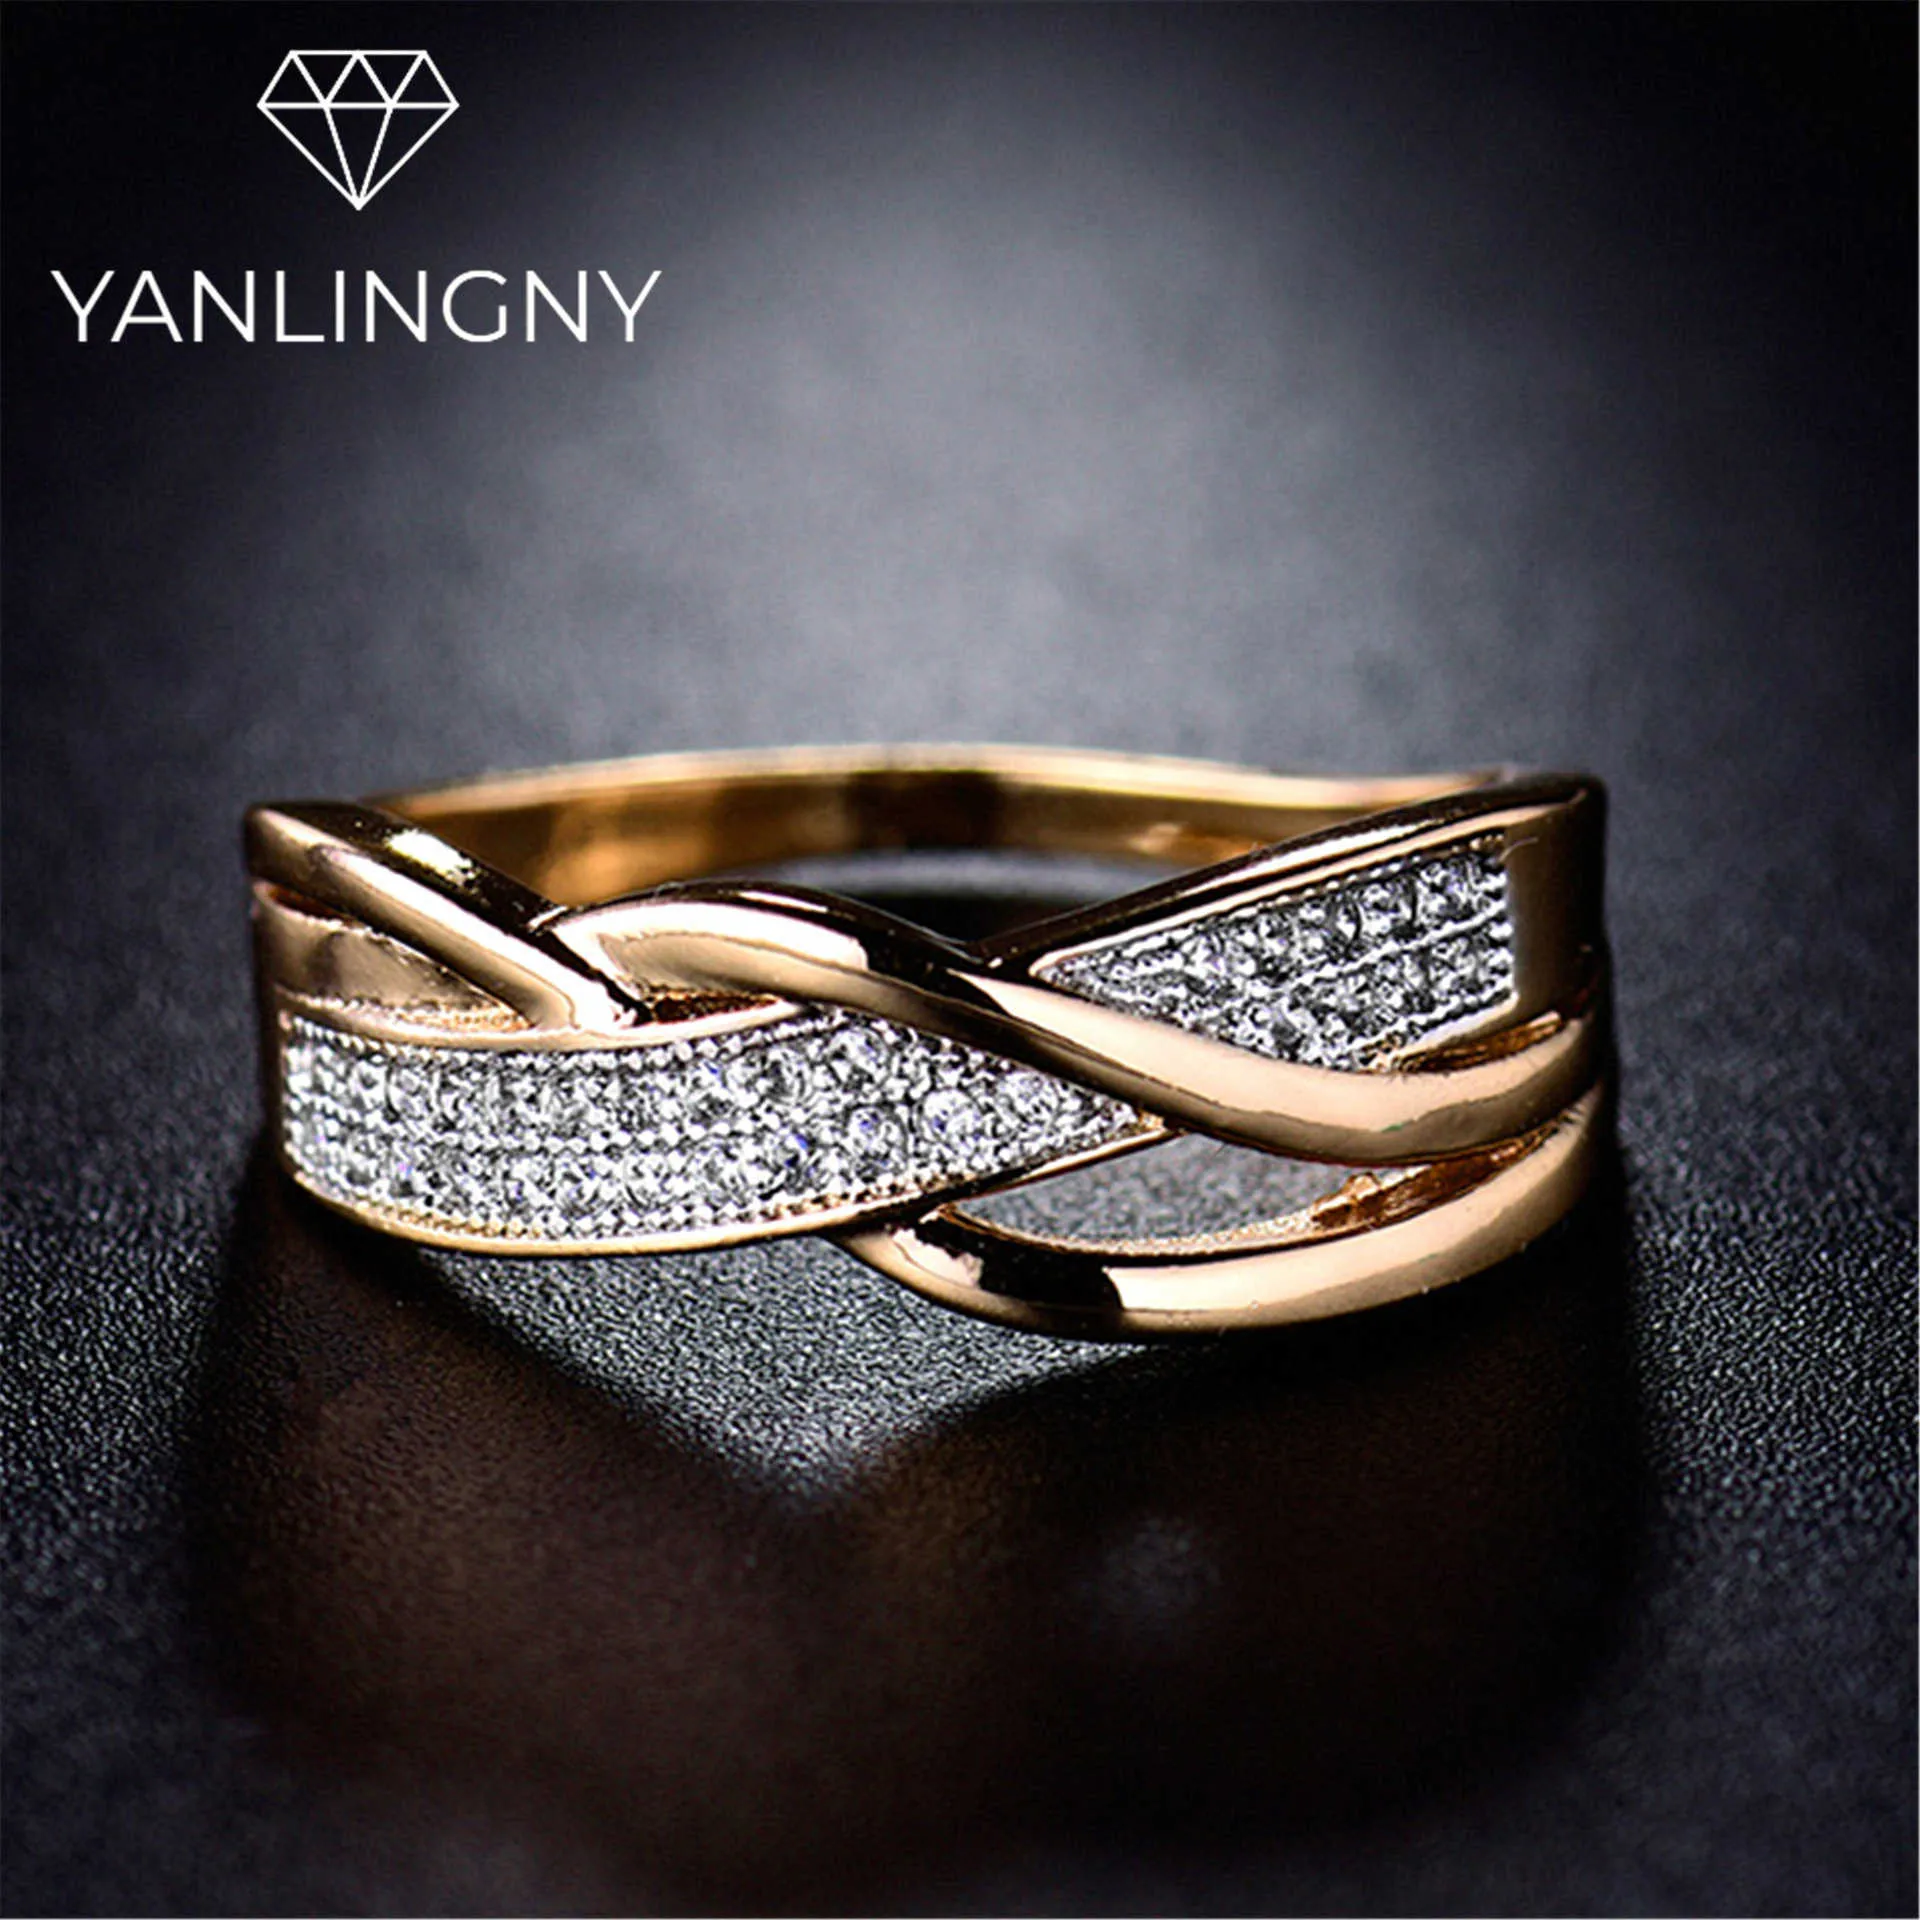 Bandringar Fashion Spiral Silver Plated Gold Color Ring X Shape Cross Cz Finger Rings for Women Girl Engagement Wedding Lady Jewelry Gift P230411